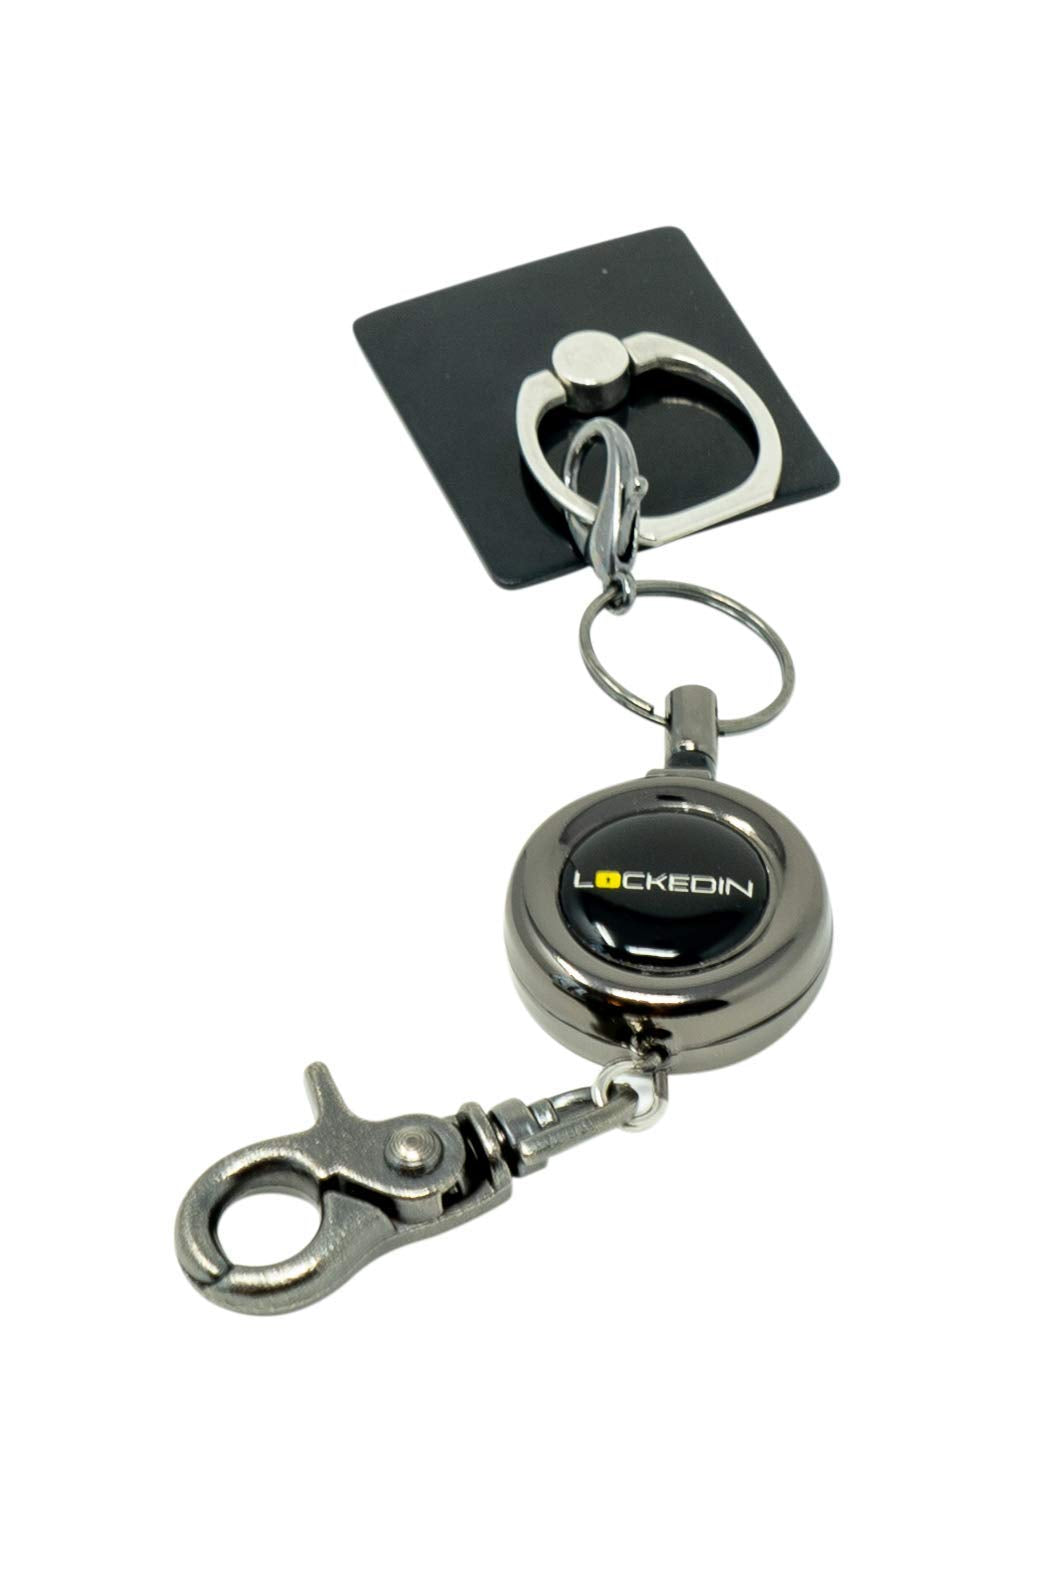 LockedIn Cell Phone Security Cord  Keep Your Phone Safe from Theft Cr –  AteamProducts